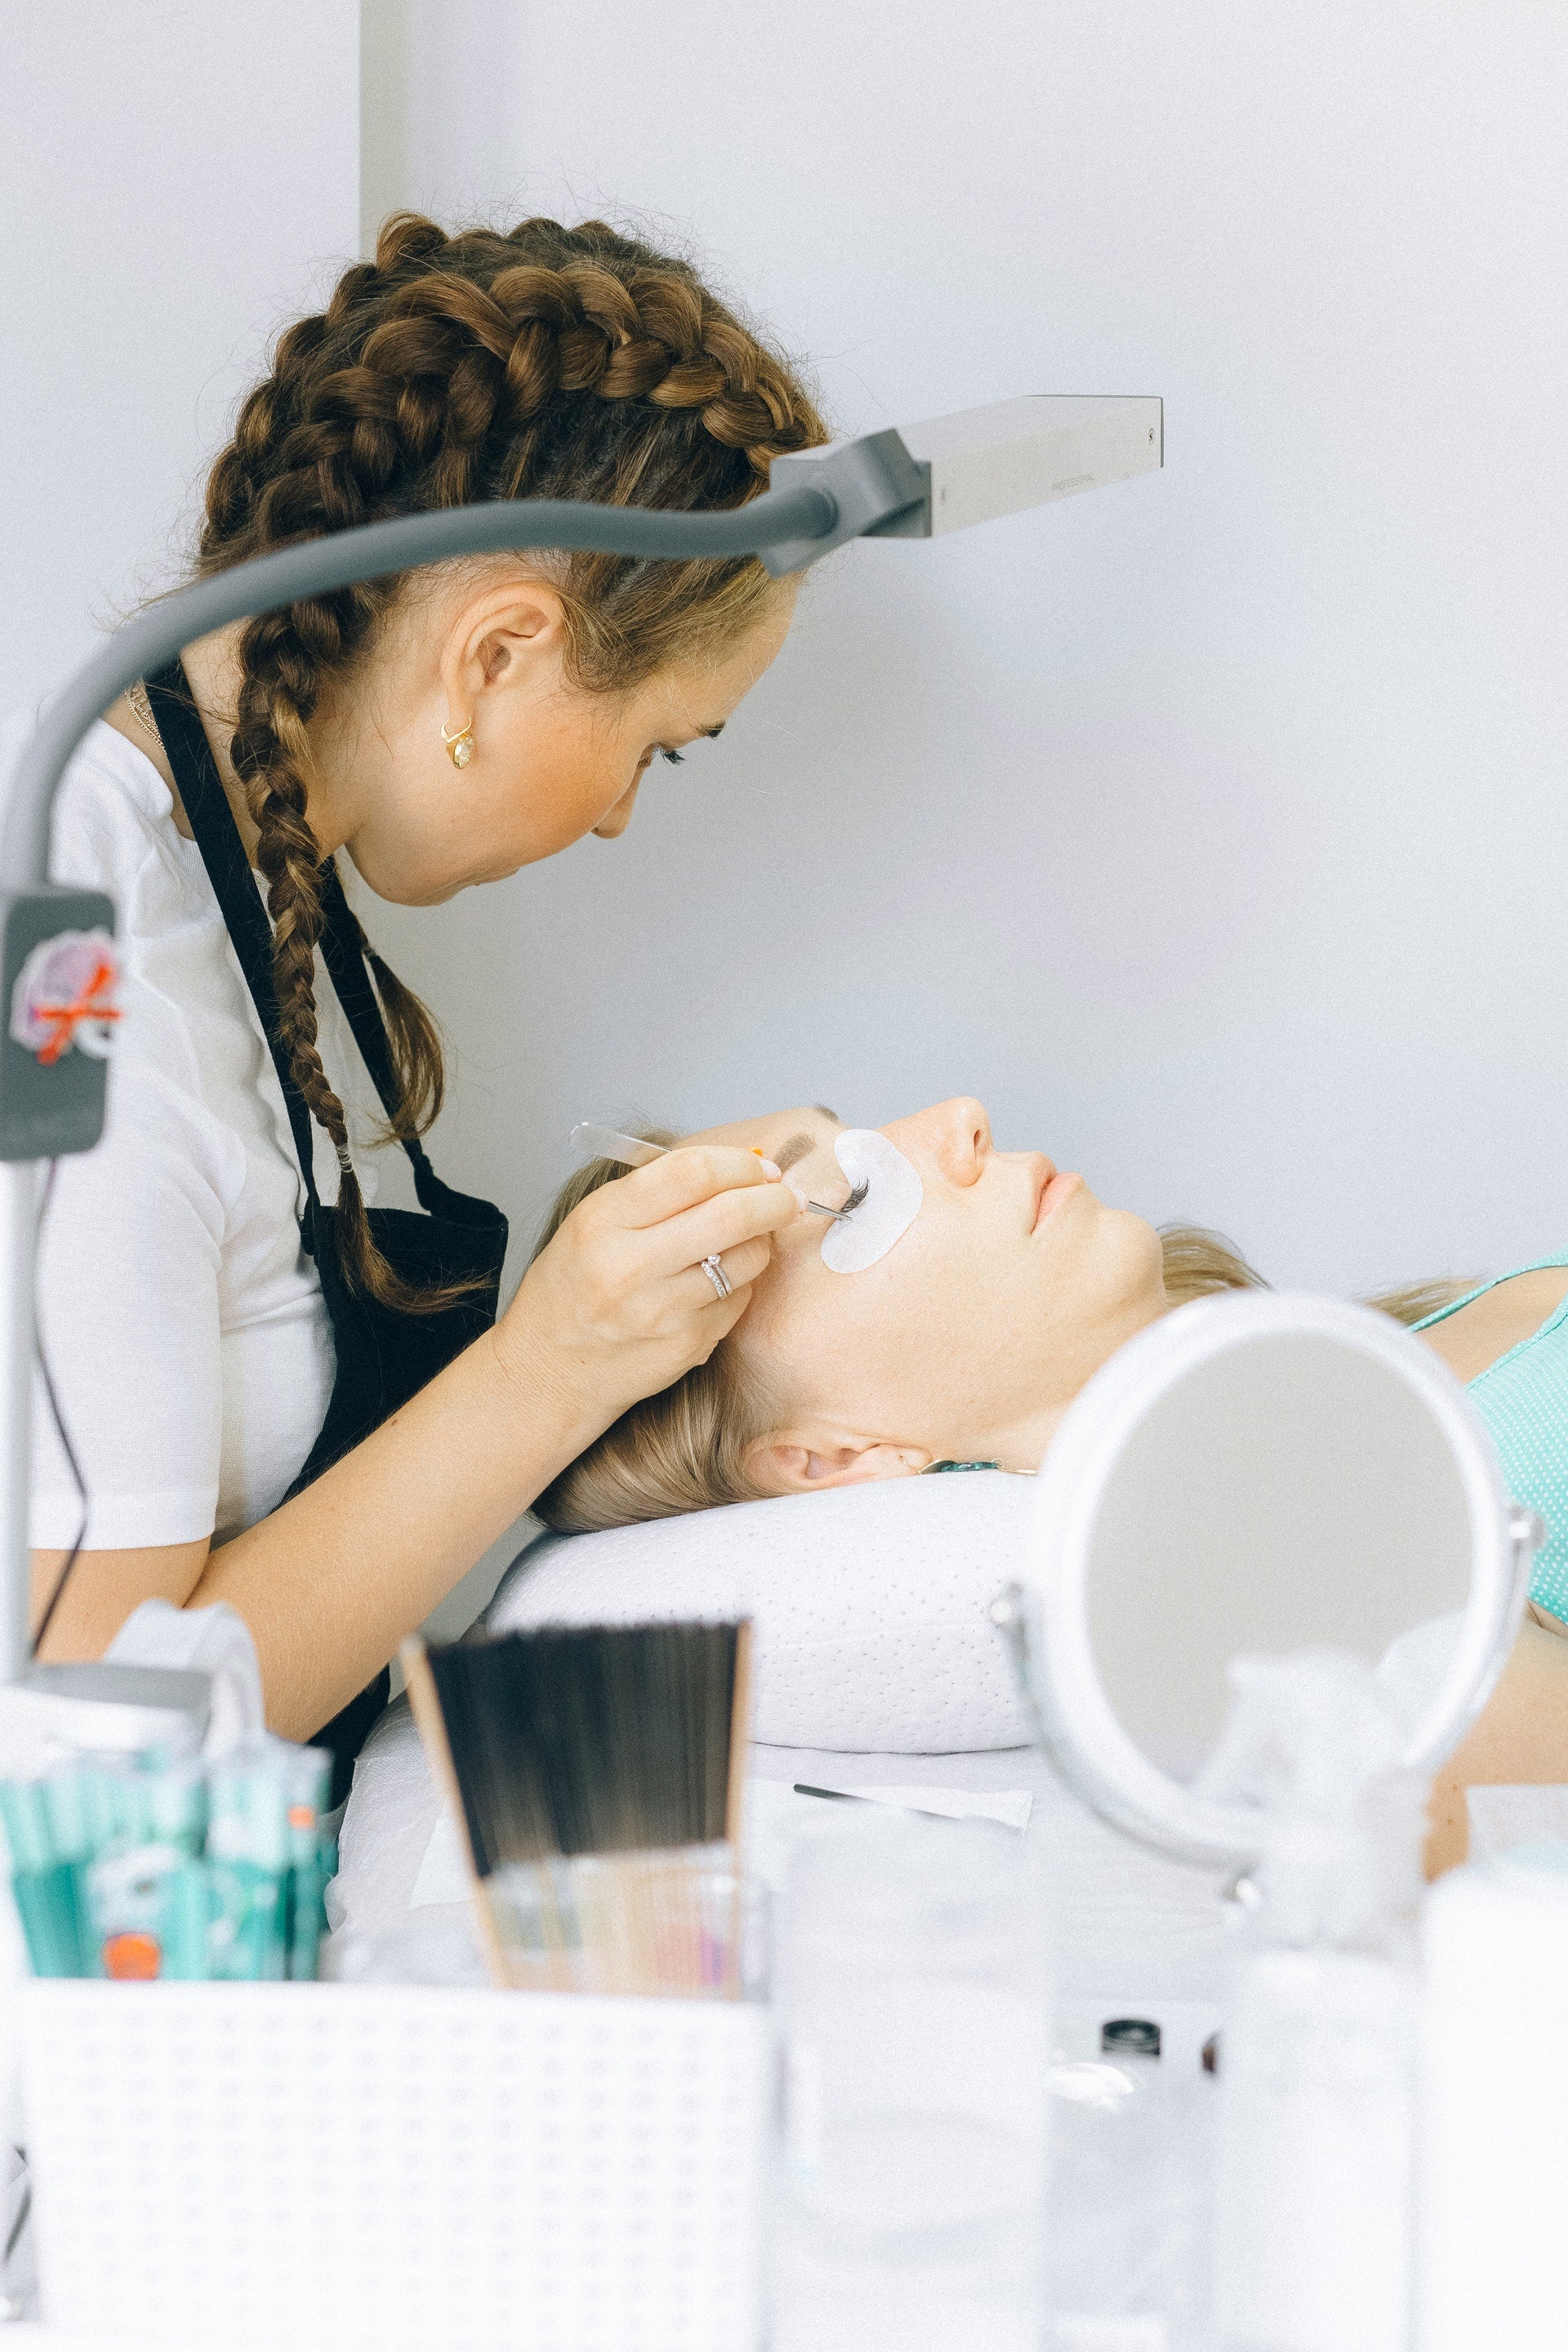 How Long Does Microblading Take?